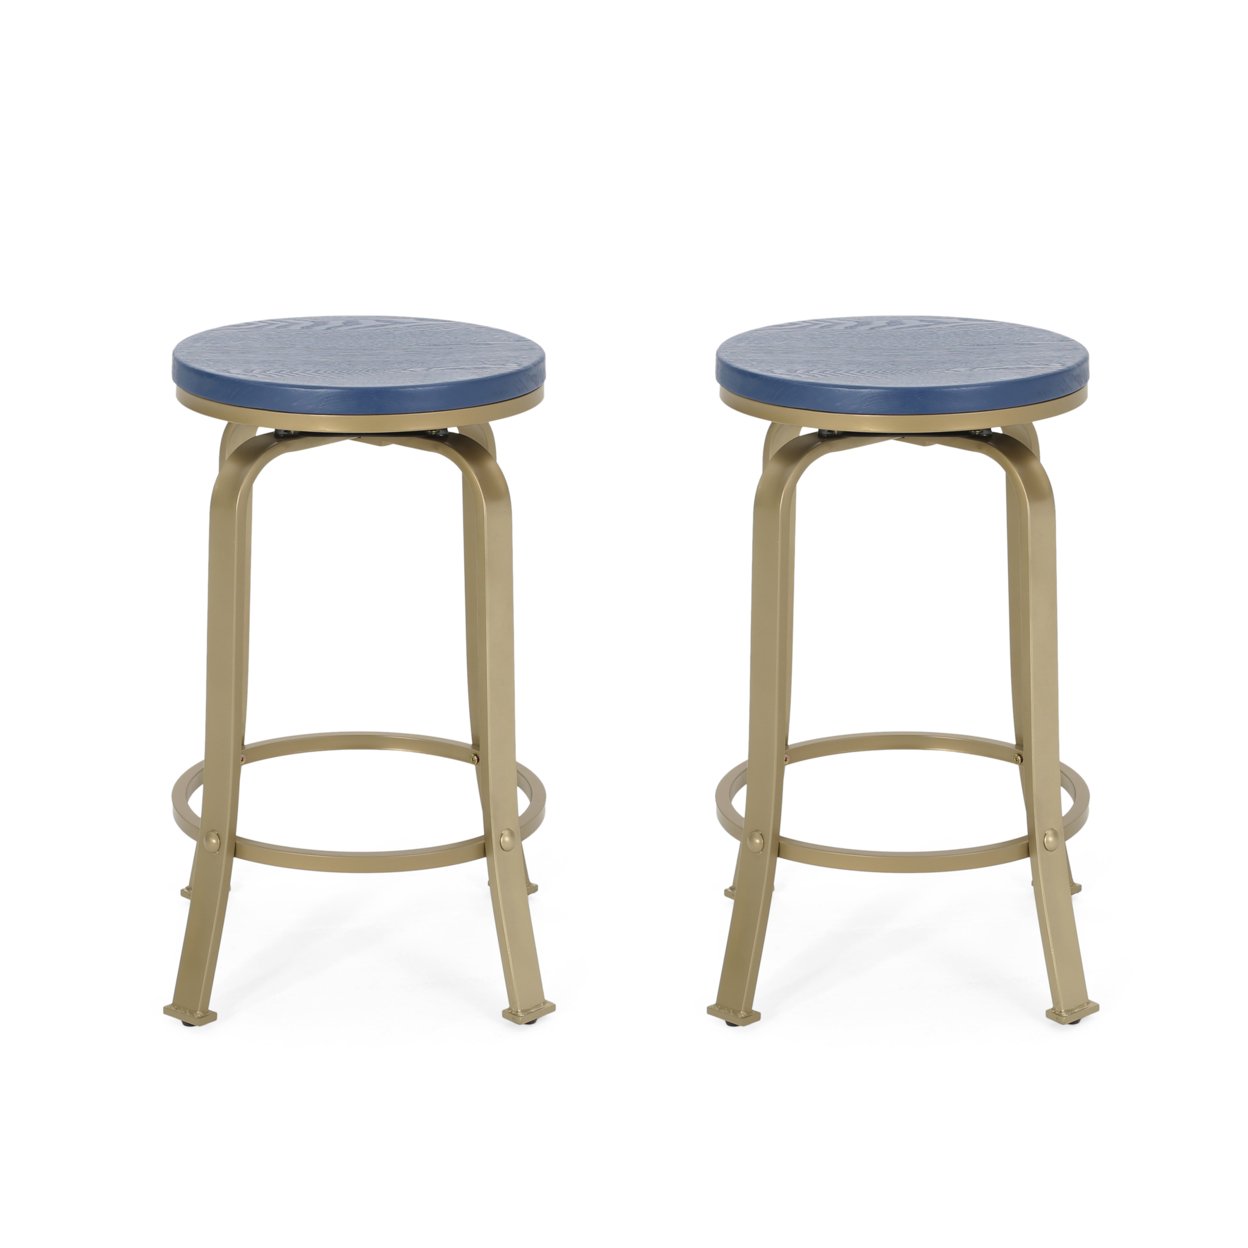 Angelina Modern Industrial Swiveling Counter Stool (Set Of 2) - Blue + Gold